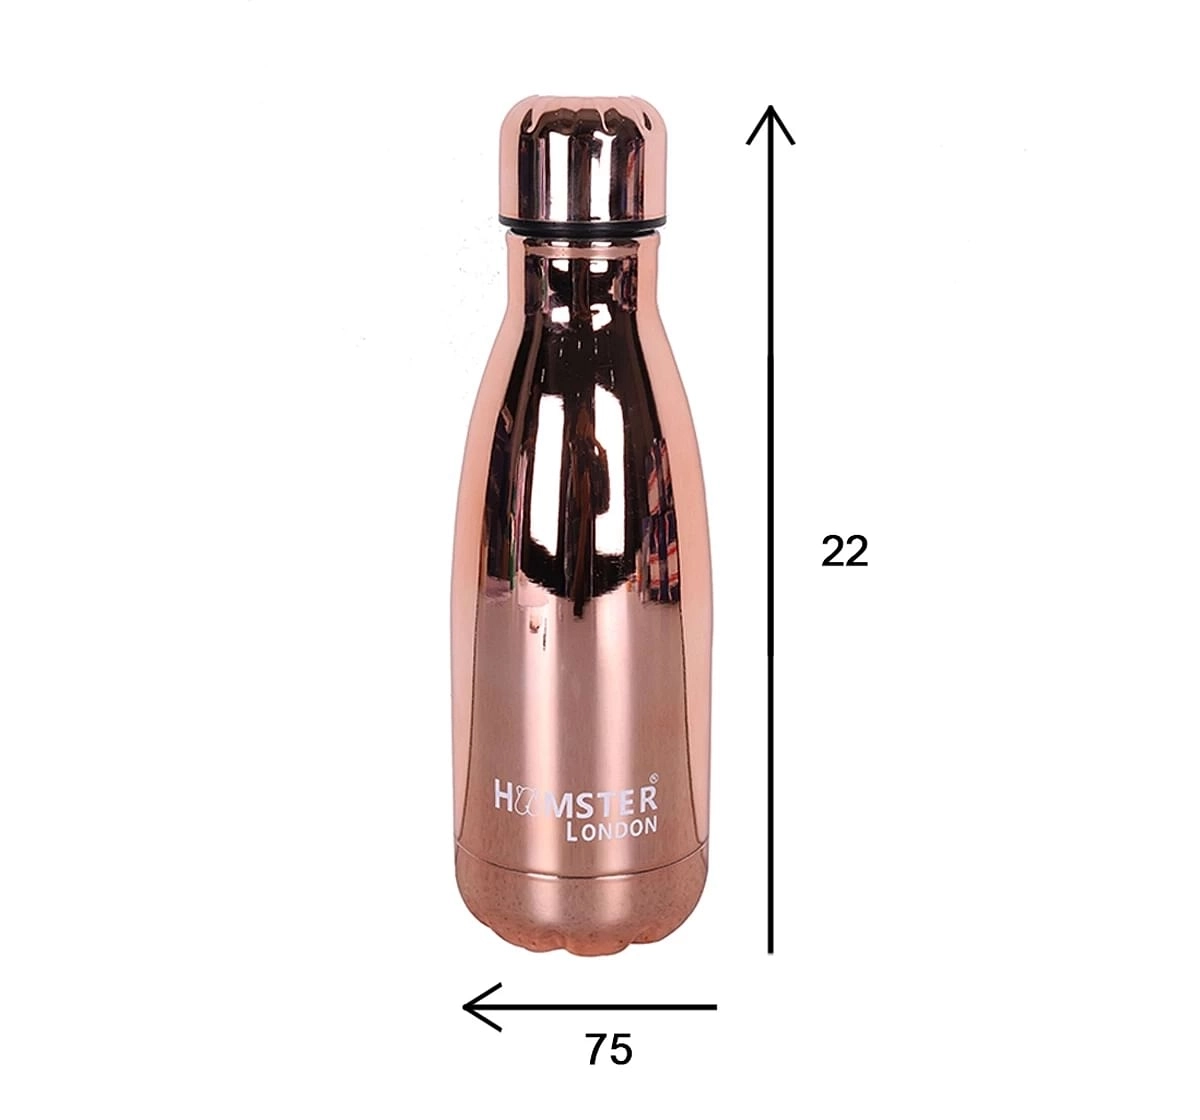 Stainless Steel Insulated Water Bottle by Hamster London for Kids, Rose Gold, Non-Toxic, BPA Free, 350ml, 5Y+